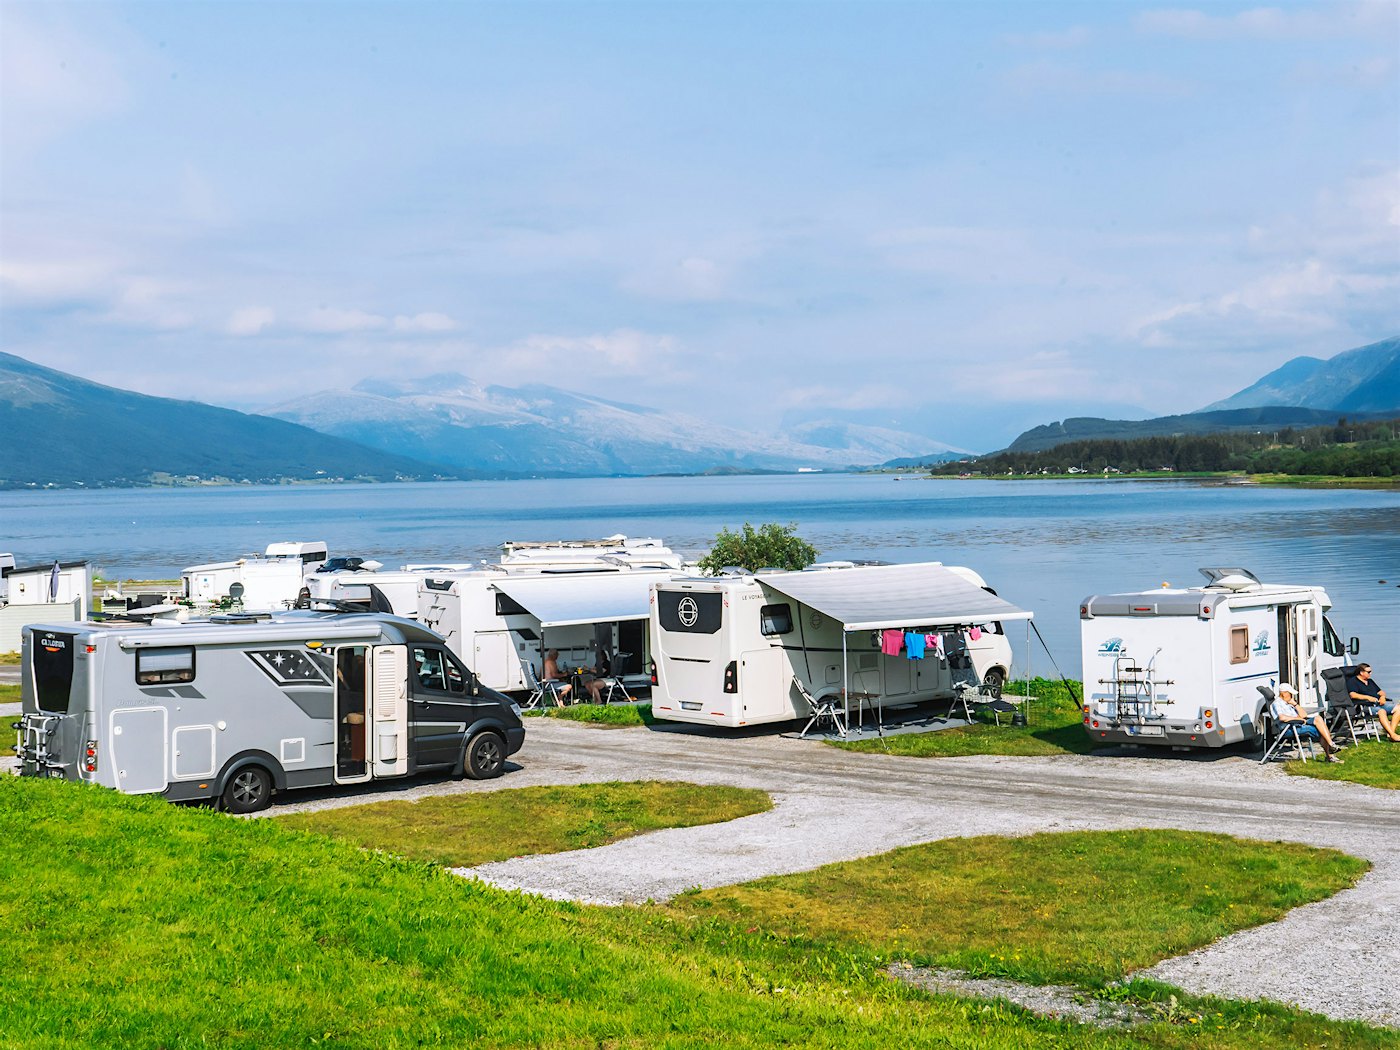 Motorhome pitches with views of the sea and mountains. Photo